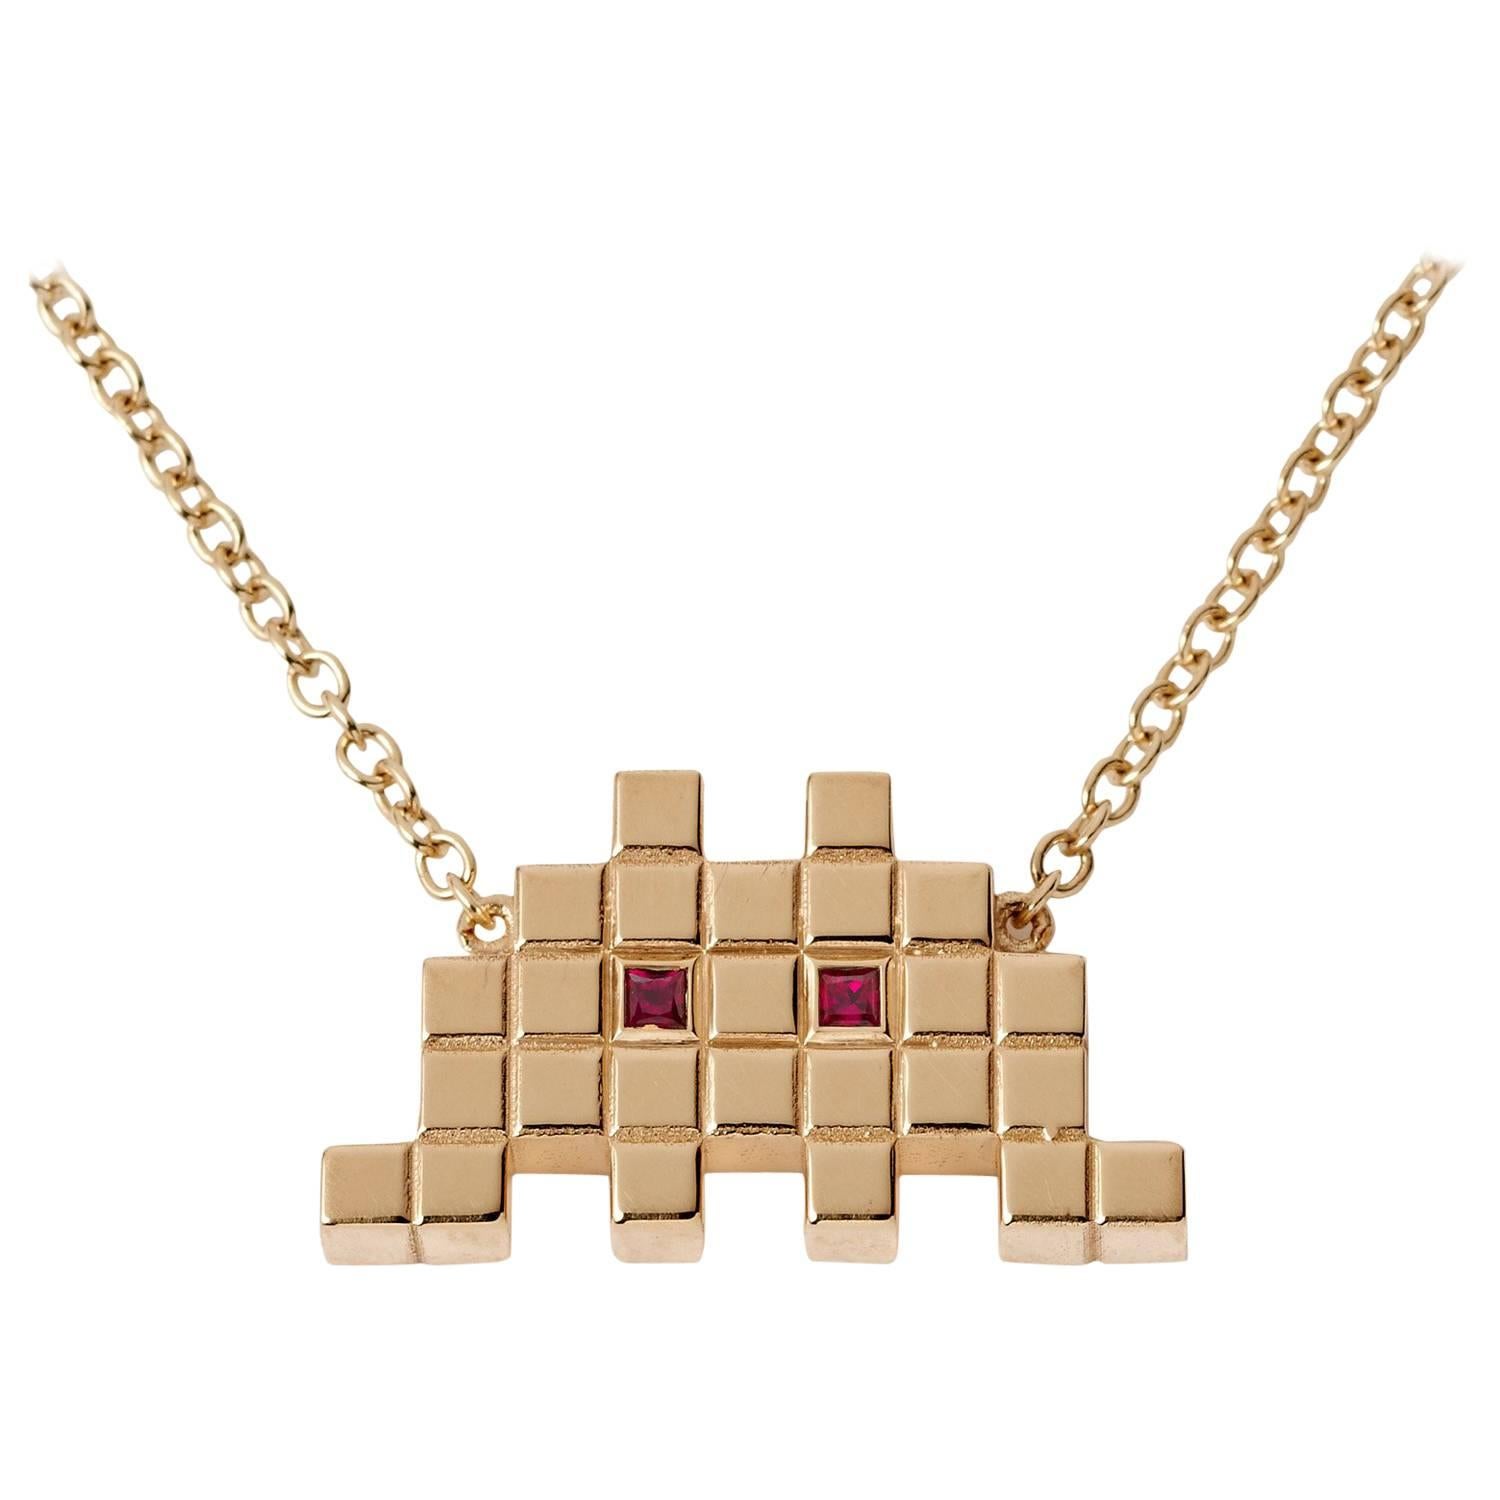 Francesca Grima Invader I Necklace in Yellow Gold and Rubies For Sale